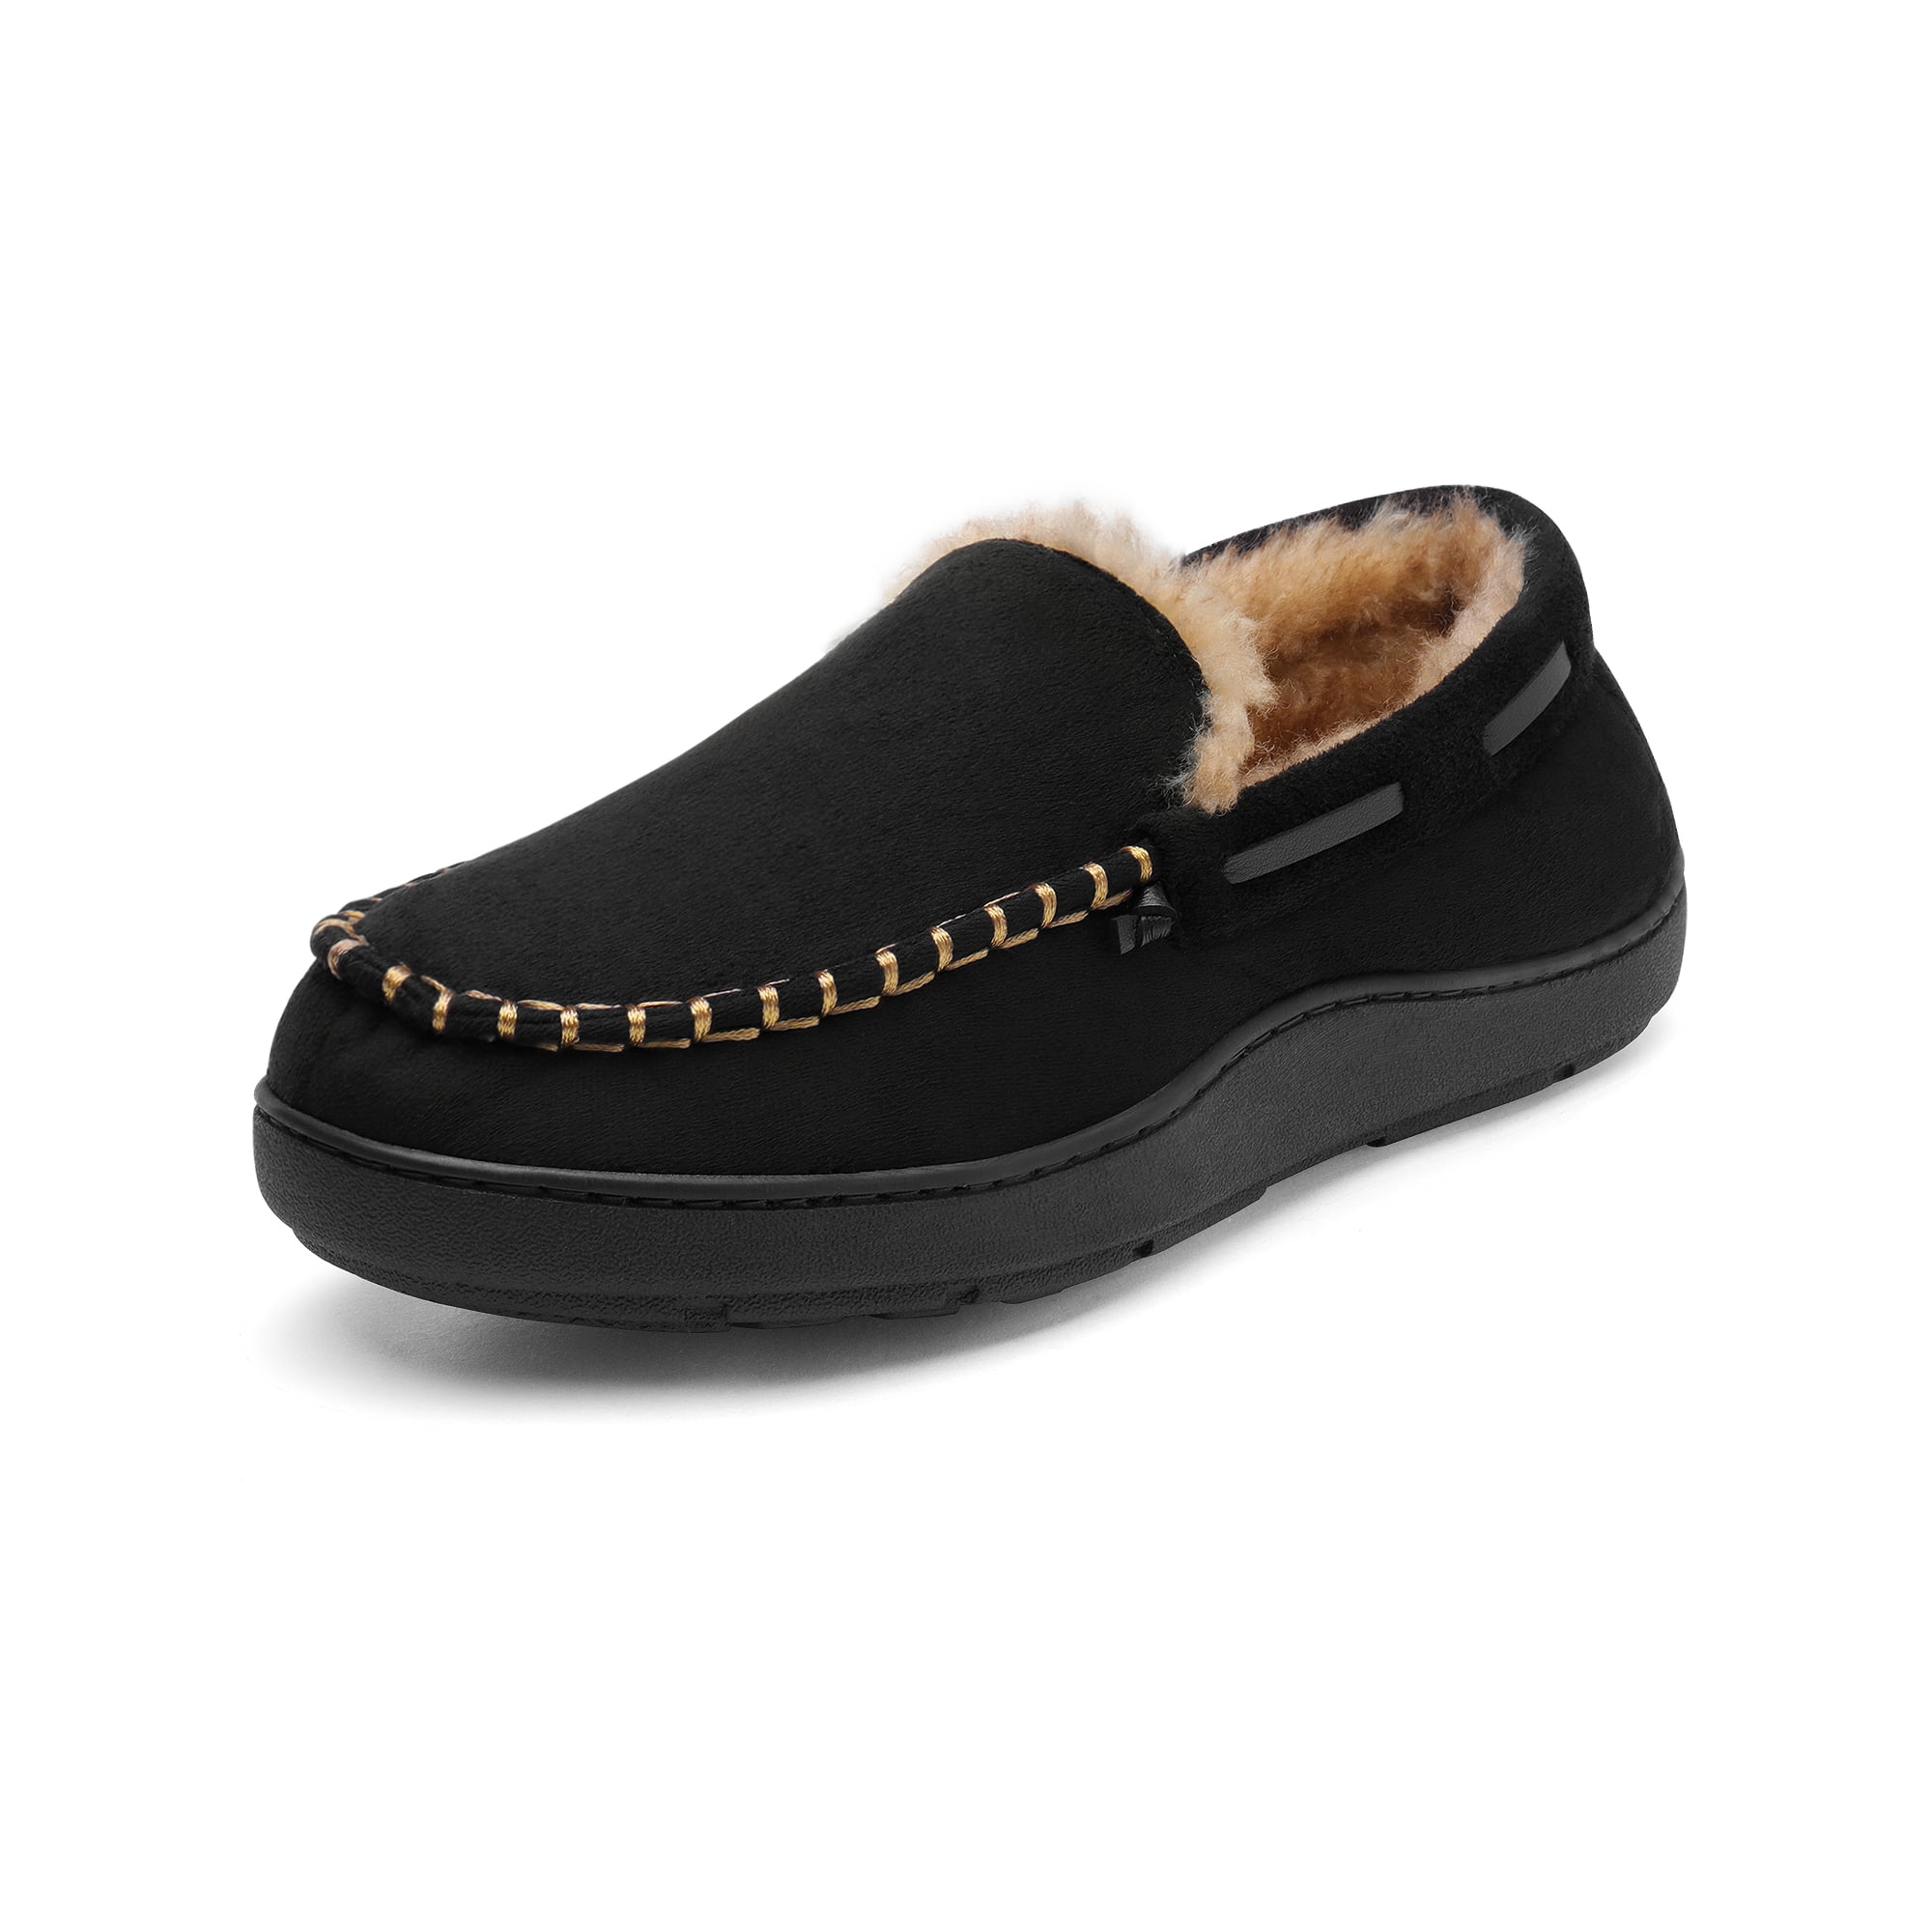 DREAM PAIRS Men's Fur-loafer-01 Moccasin Slippers